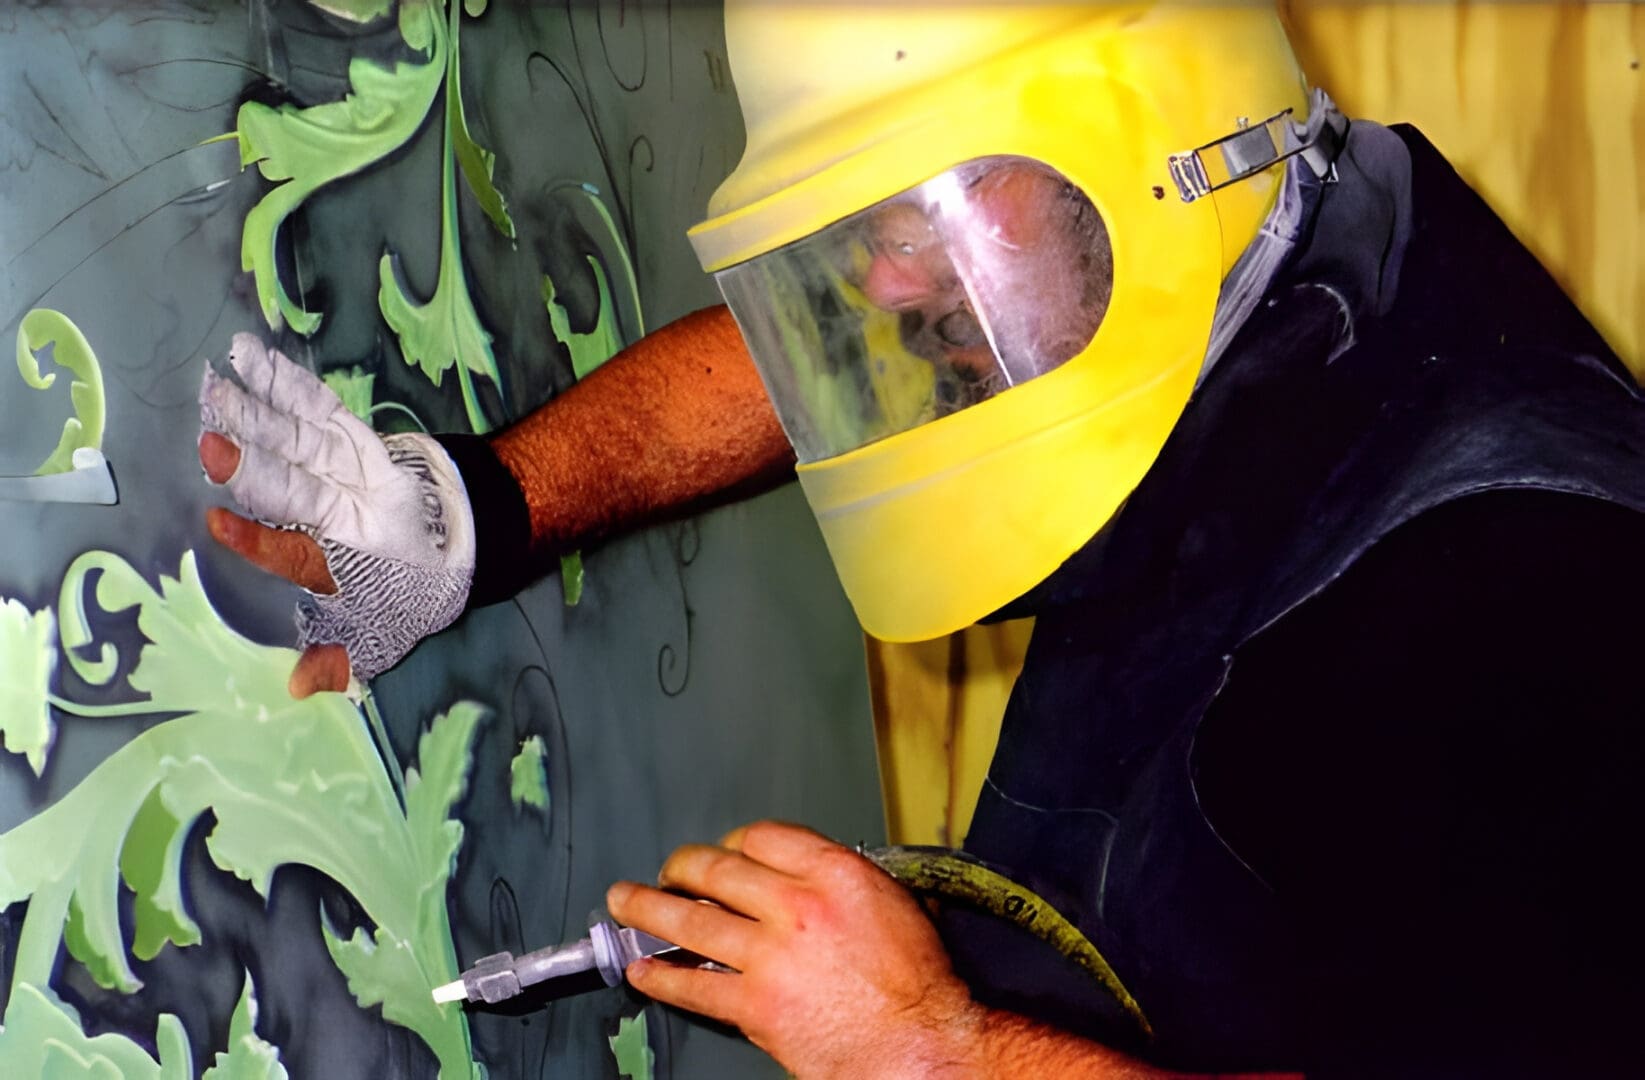 A person in a yellow helmet is painting